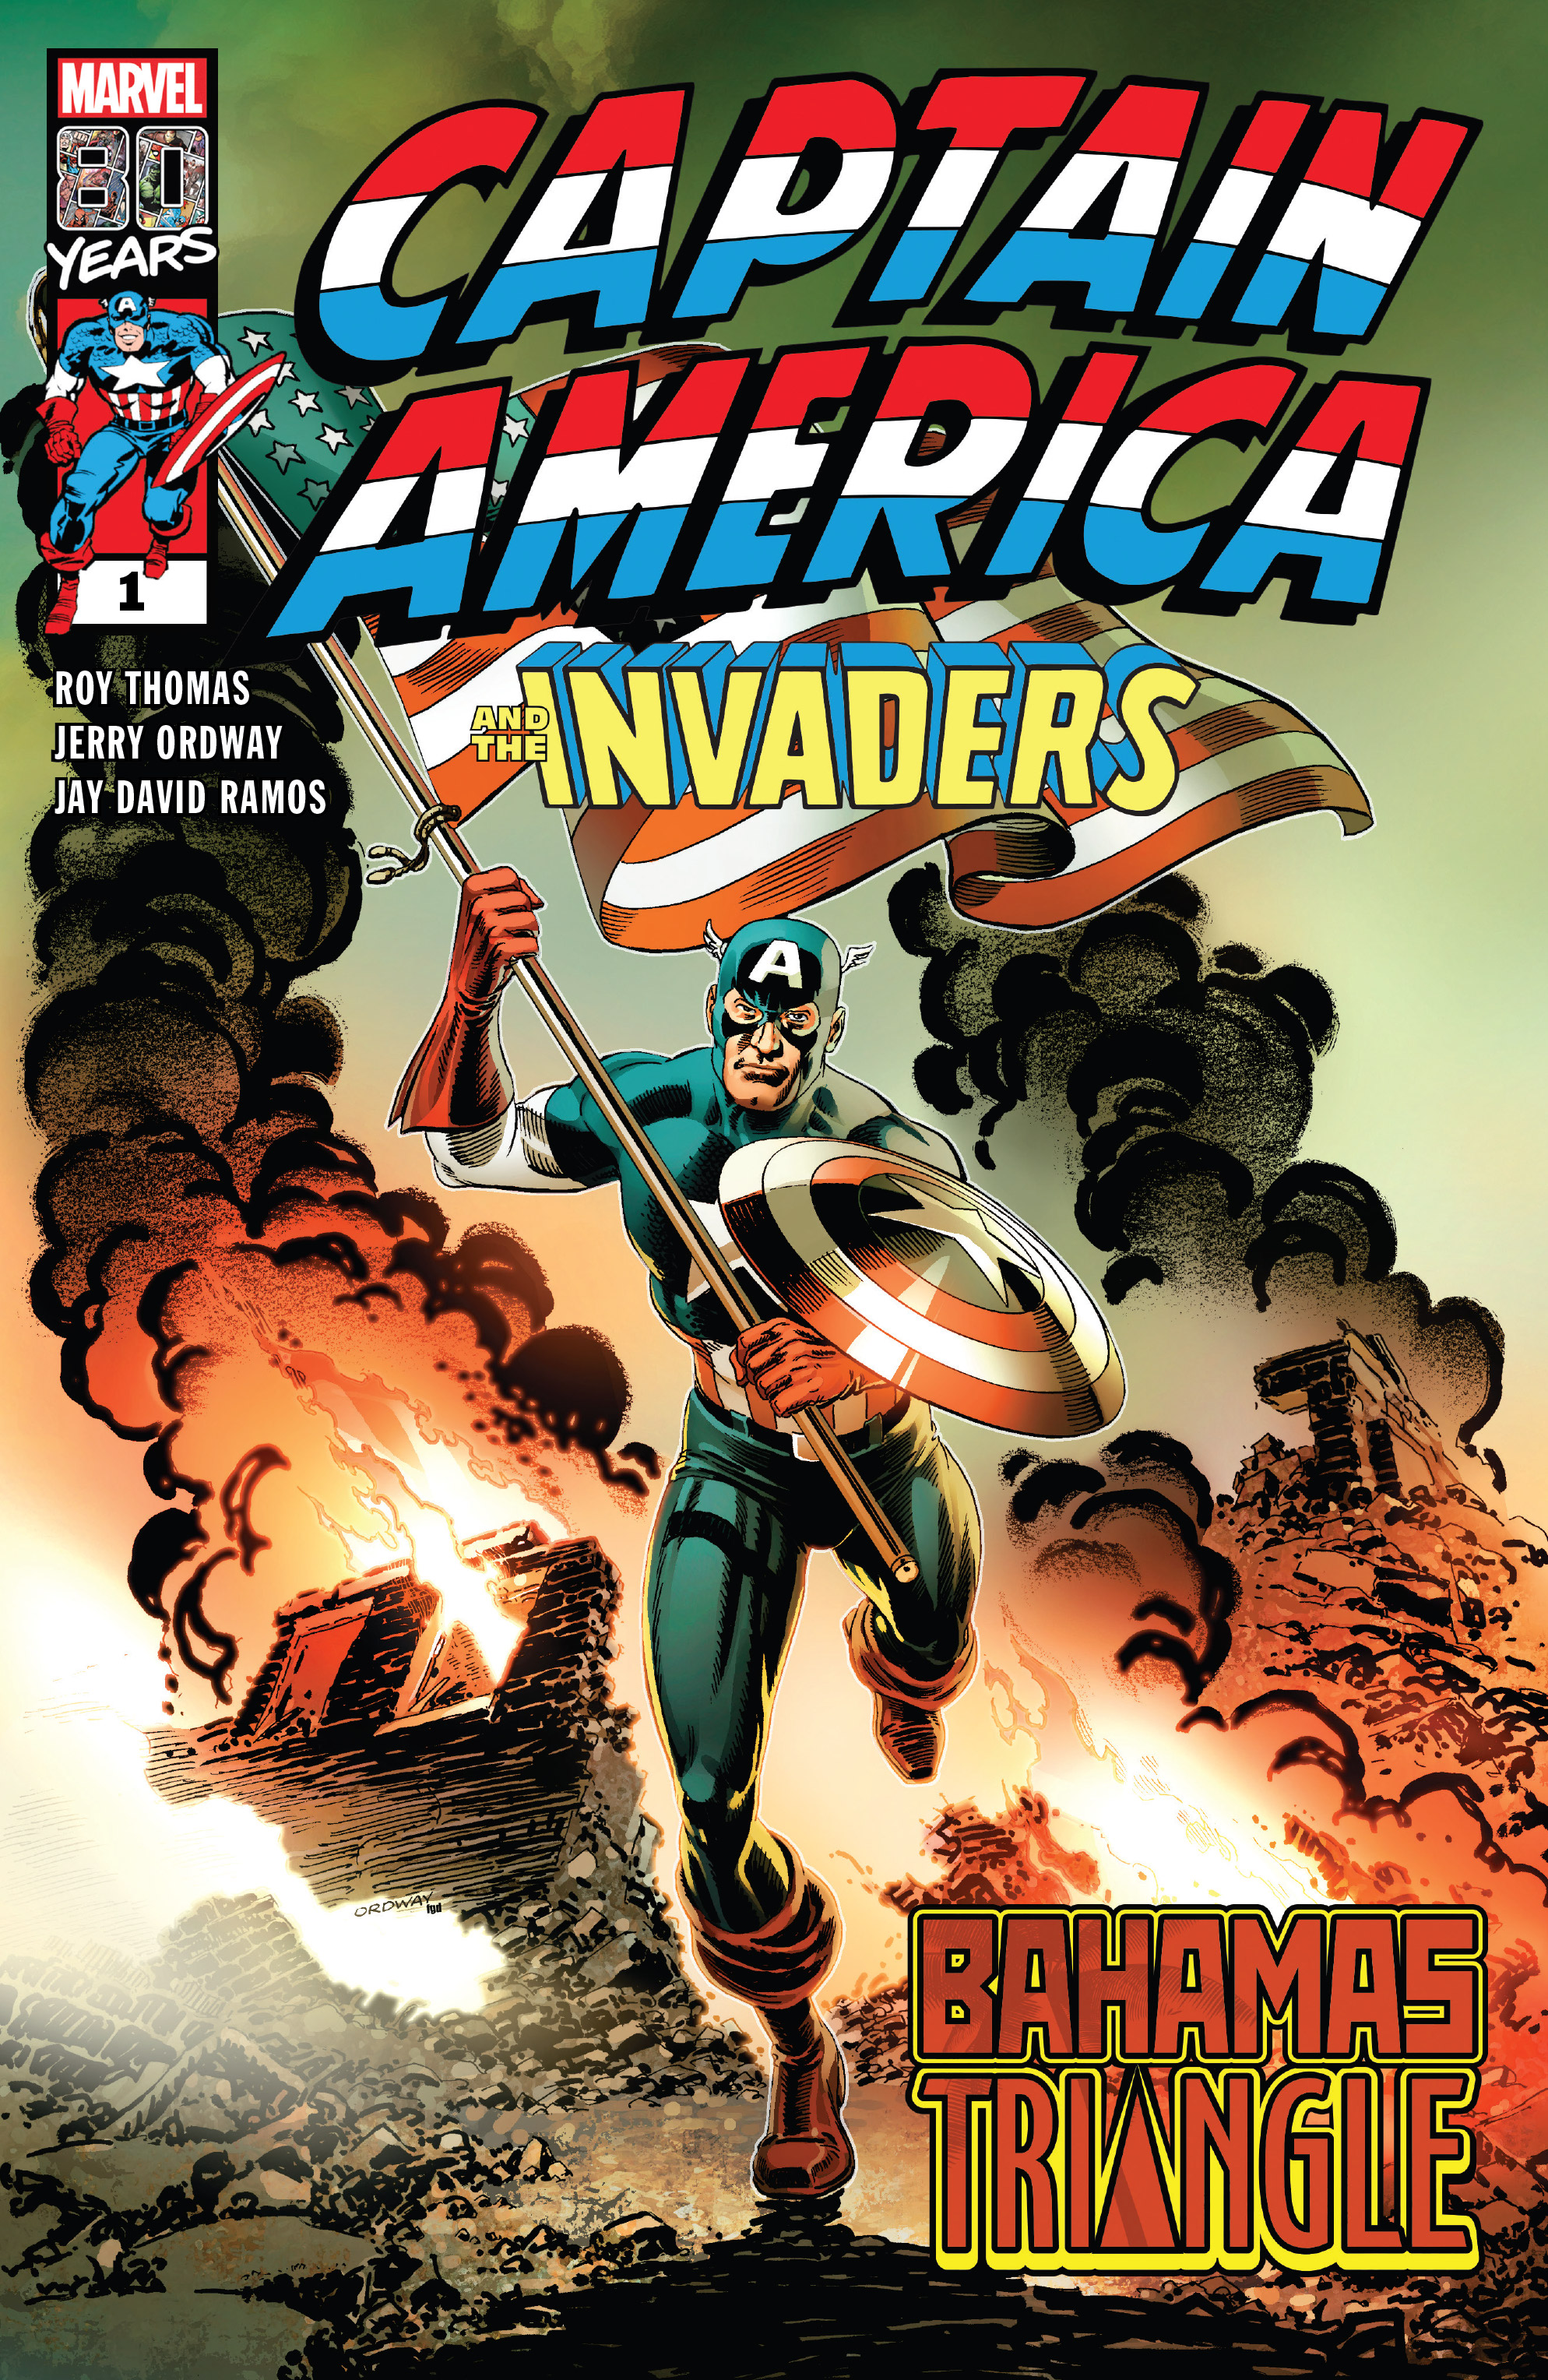 Read online Captain America & the Invaders: Bahamas Triangle comic -  Issue # Full - 1